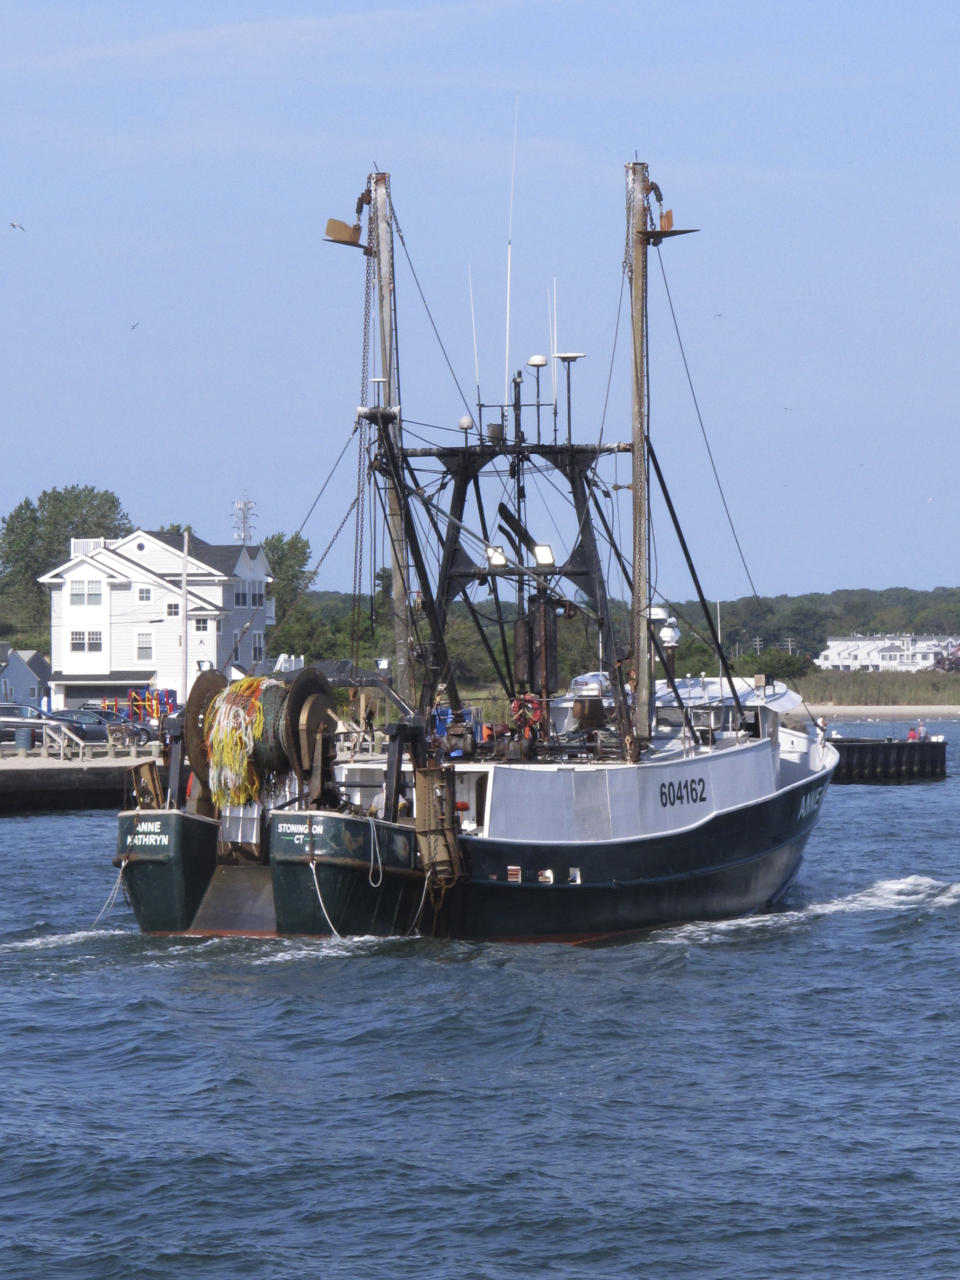 A fishing boat enters the Manasquan Inlet in Manasquan N.J. on Sept. 11, 2019 after returning from the ocean. A report issued March 29, 2023 by two federal marine science agencies and the commercial fishing industry highlighted several potential negative aspects of offshore wind energy development on the fishing industry and called for additional research. (AP Photo/Wayne Parry)